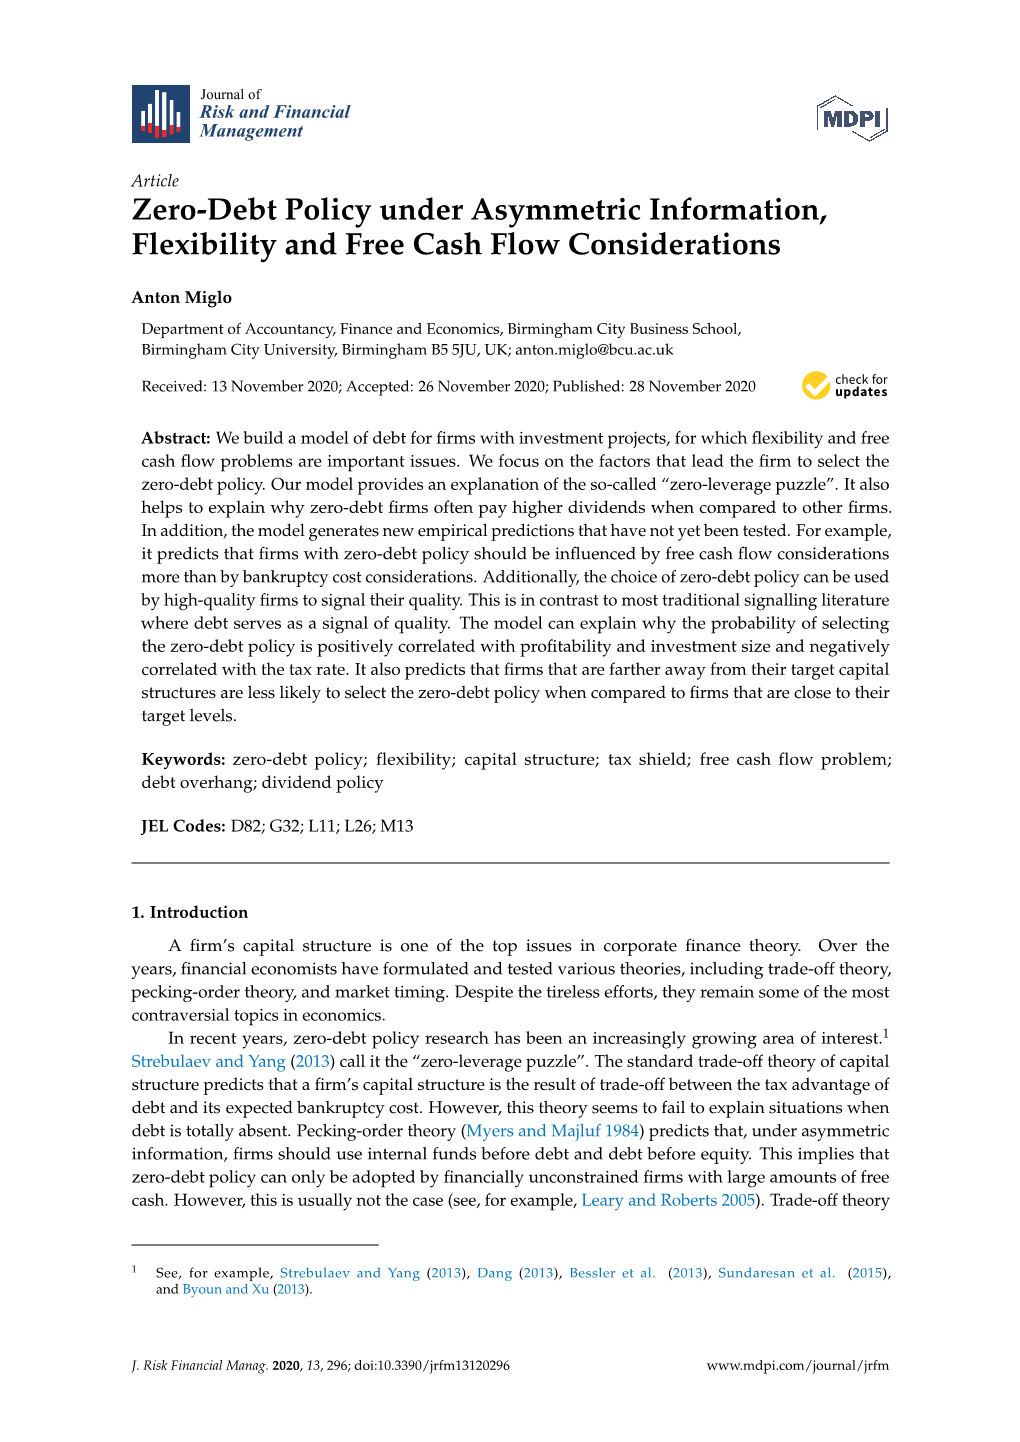 Zero-Debt Policy Under Asymmetric Information, Flexibility and Free Cash Flow Considerations